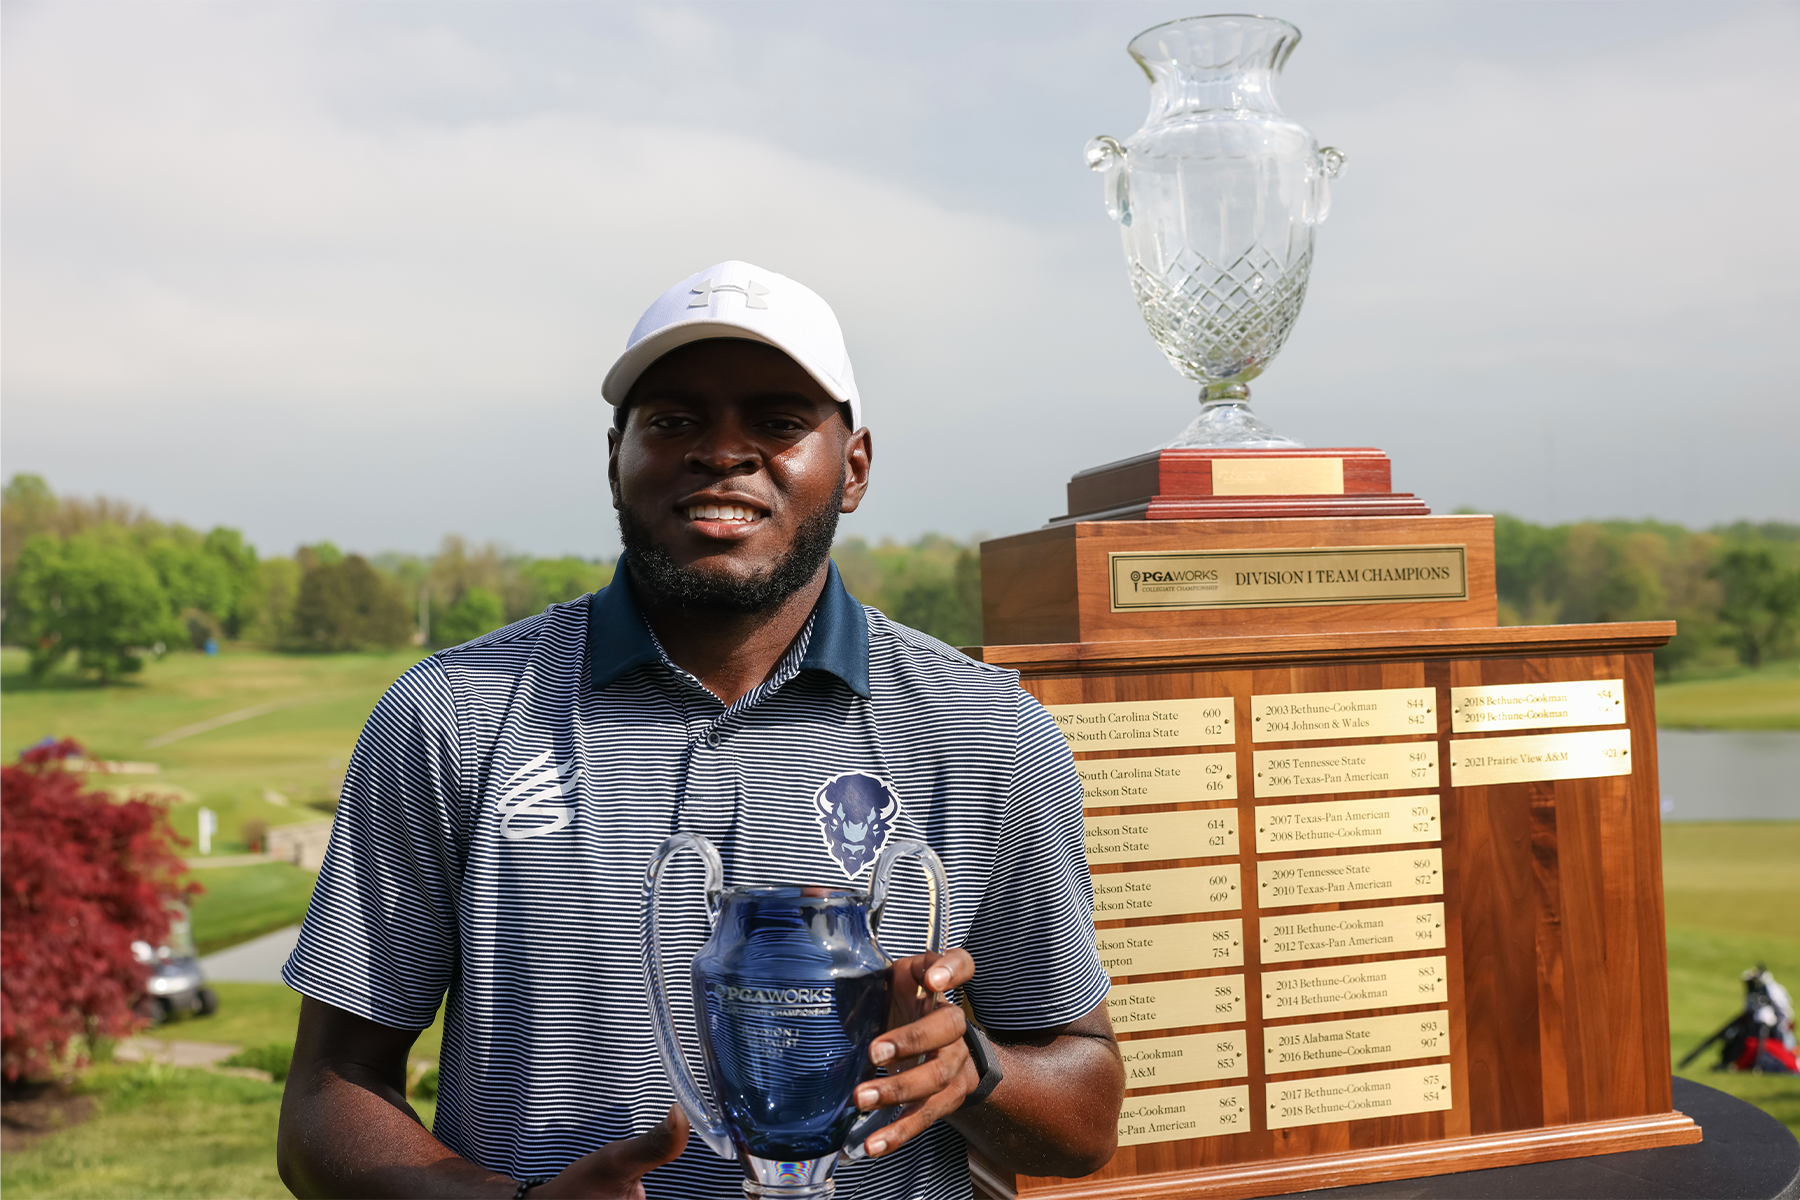 2022 PWCC Division I Medalist, Gregory Odom Jr. of Howard University poses with his trophy during the Awards Ceremony for the 2022 PGA Works Collegiate Championship at The Union League Liberty Hill on May 4, 2022 in Philadelphia, Pennsylvania. (Photo by Matt Hahn/PGA of America)